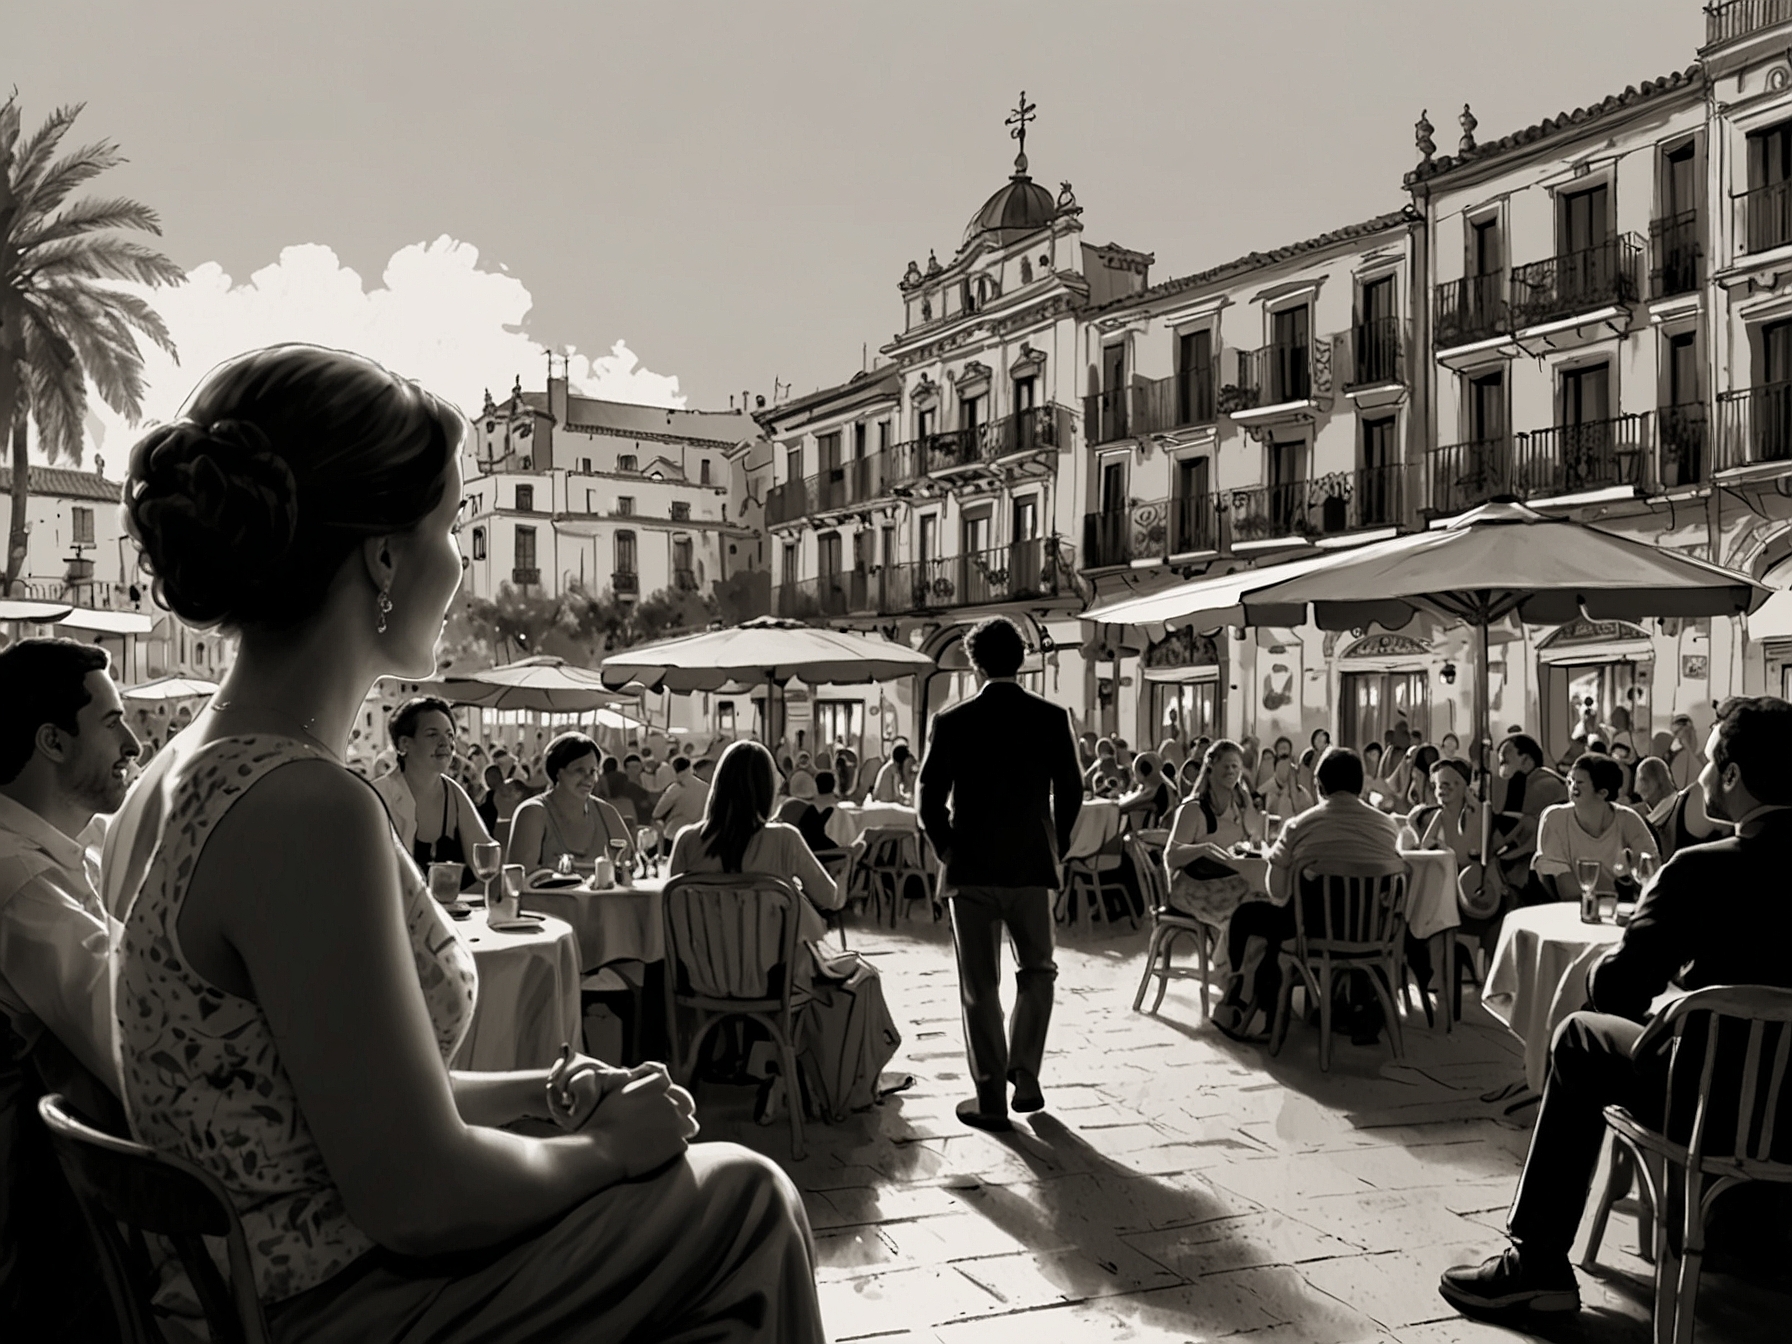 Santiago immersed in Spanish culture, watching flamenco dancers perform in a vibrant setting, depicting their memorable family trip to Spain filled with cultural insights.